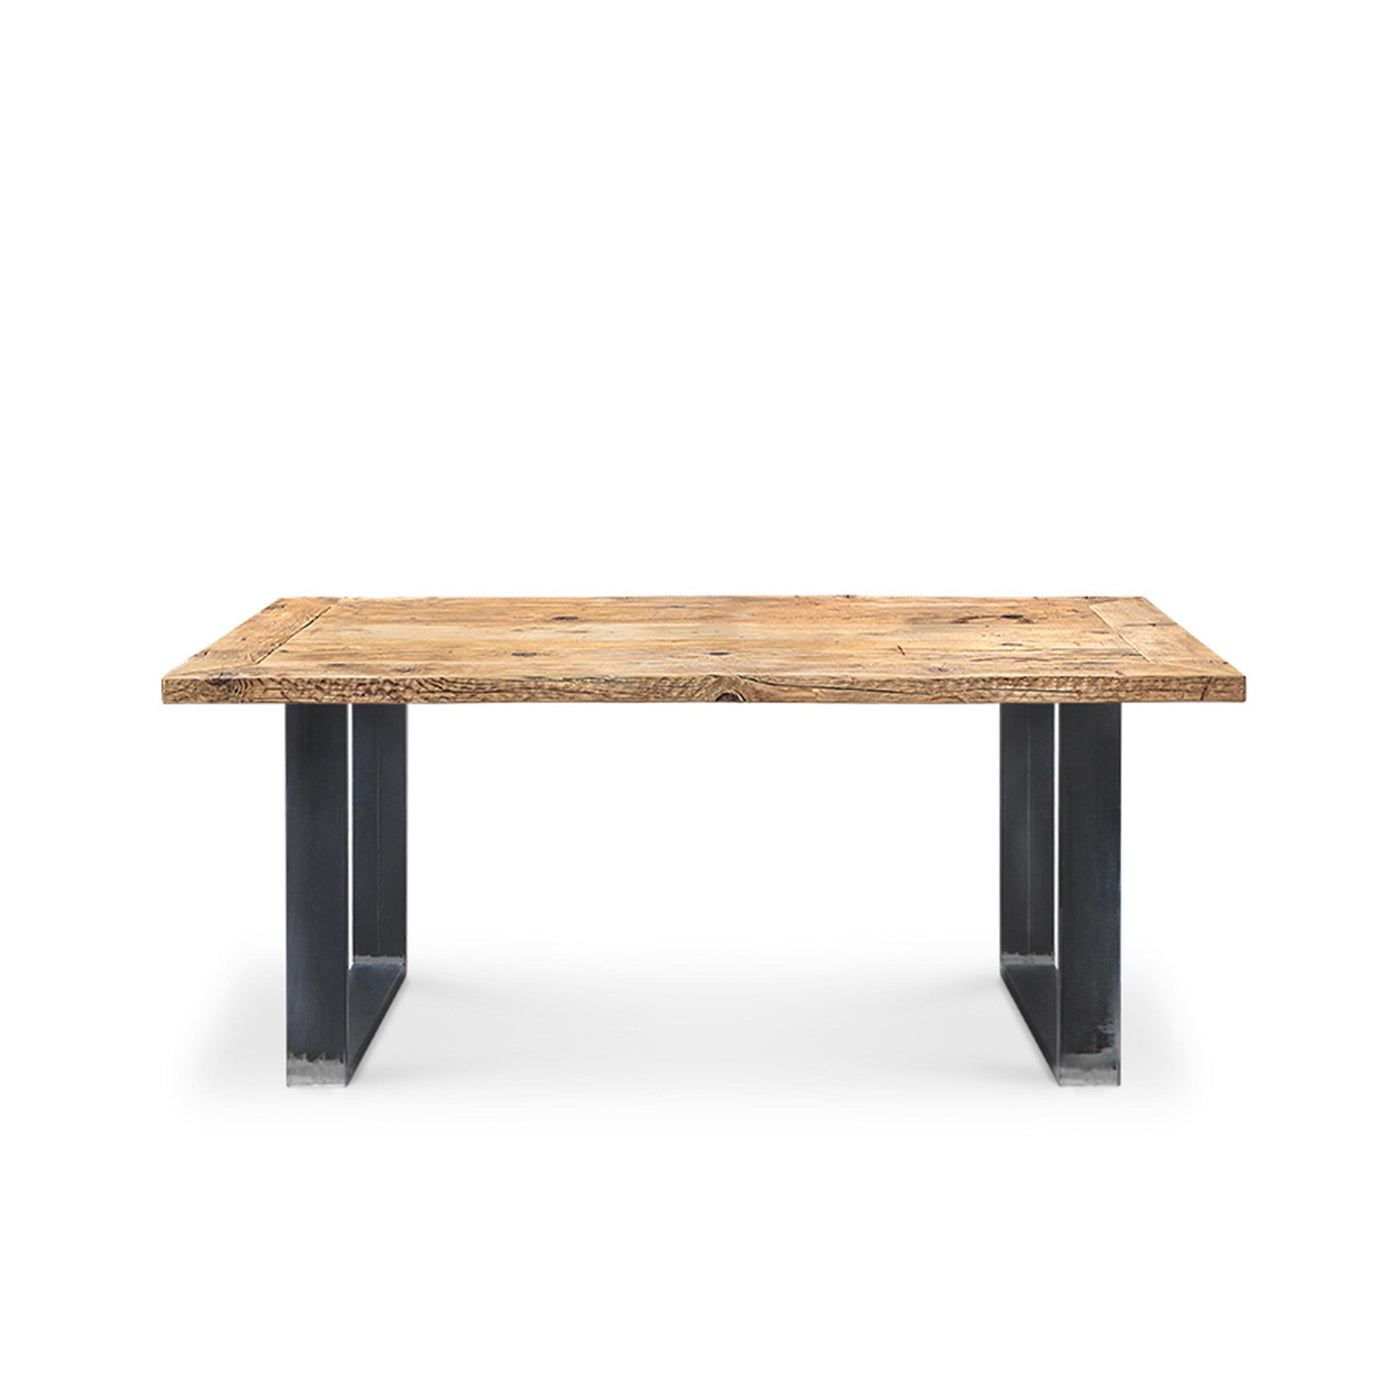 Wood Dining Table MAXIMO Six Seater by Giuseppe Mazzardi for Inventoom 01